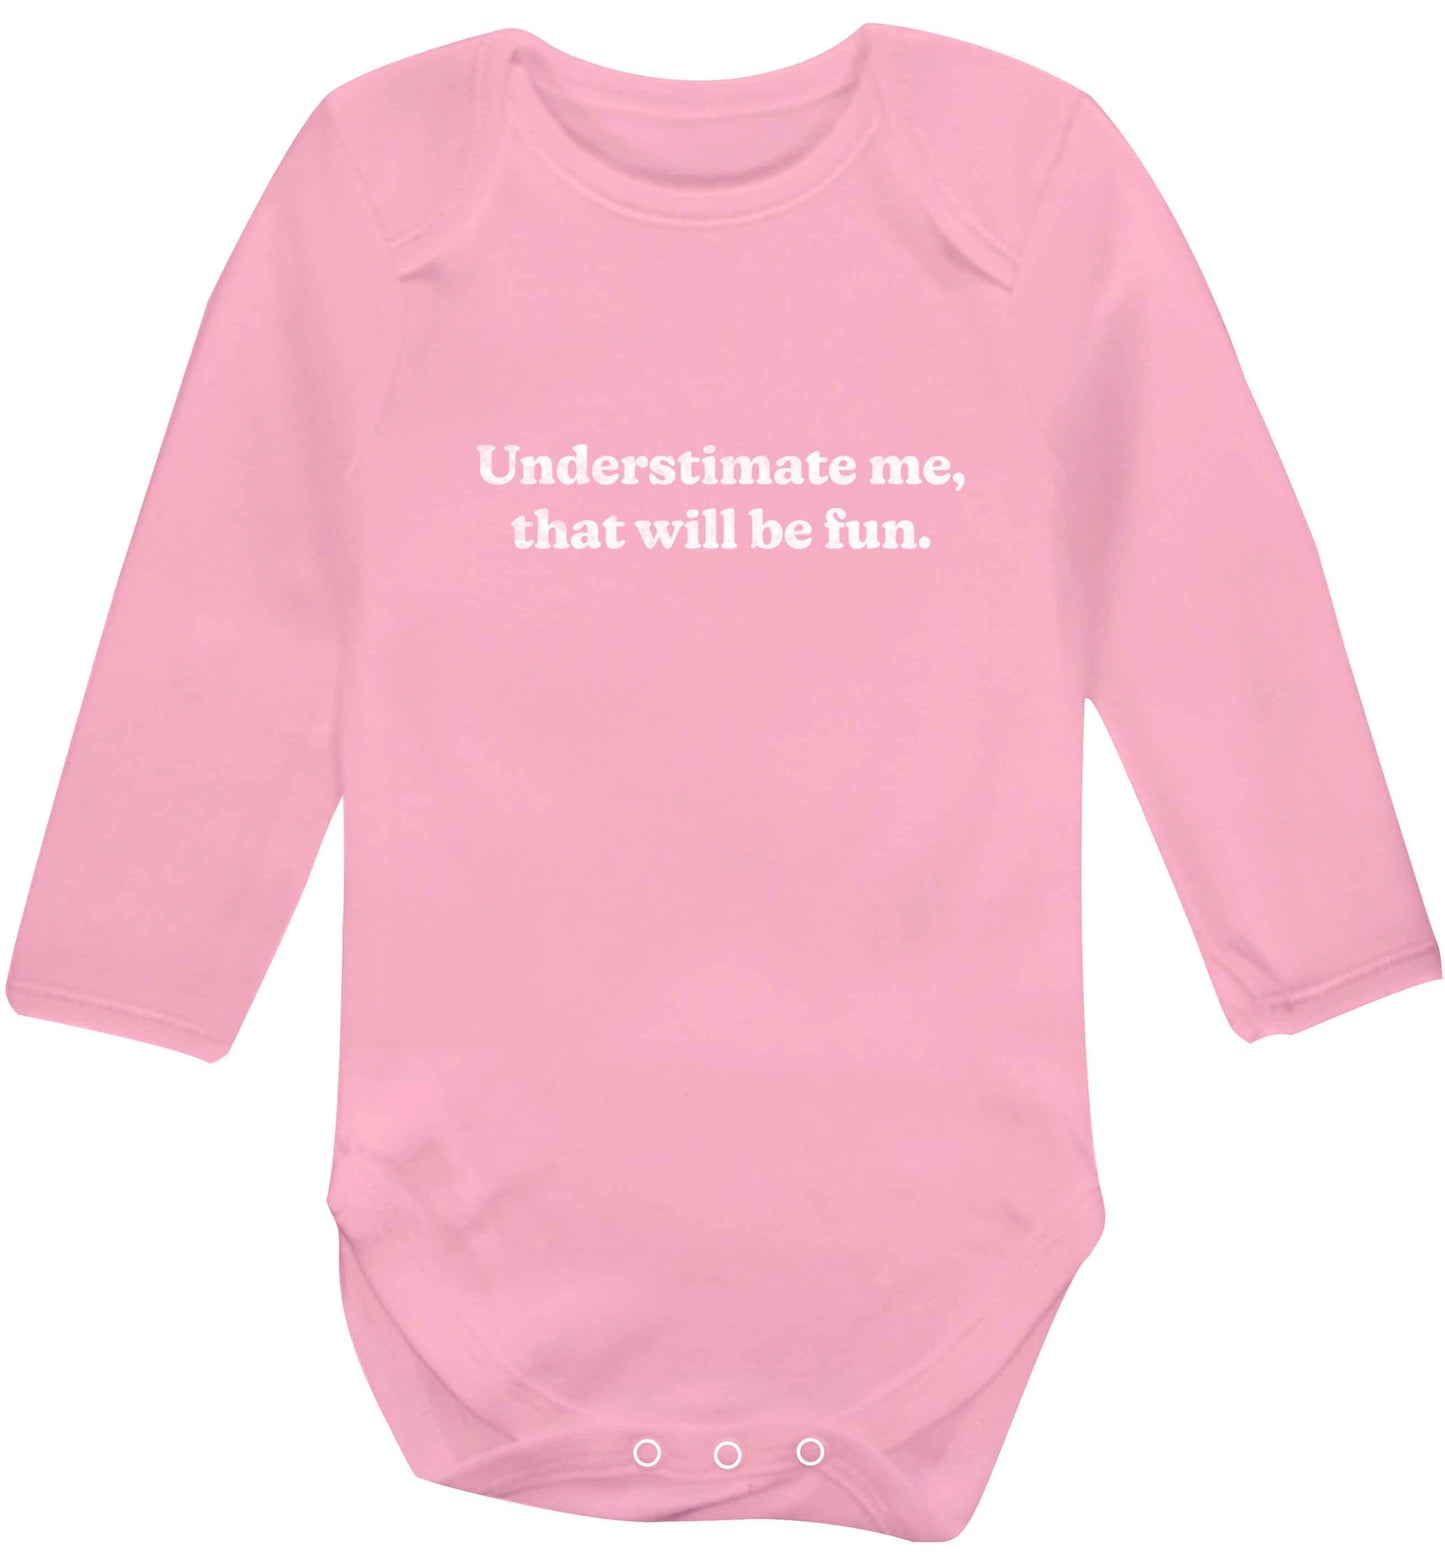 Underestimate me that will be fun baby vest long sleeved pale pink 6-12 months